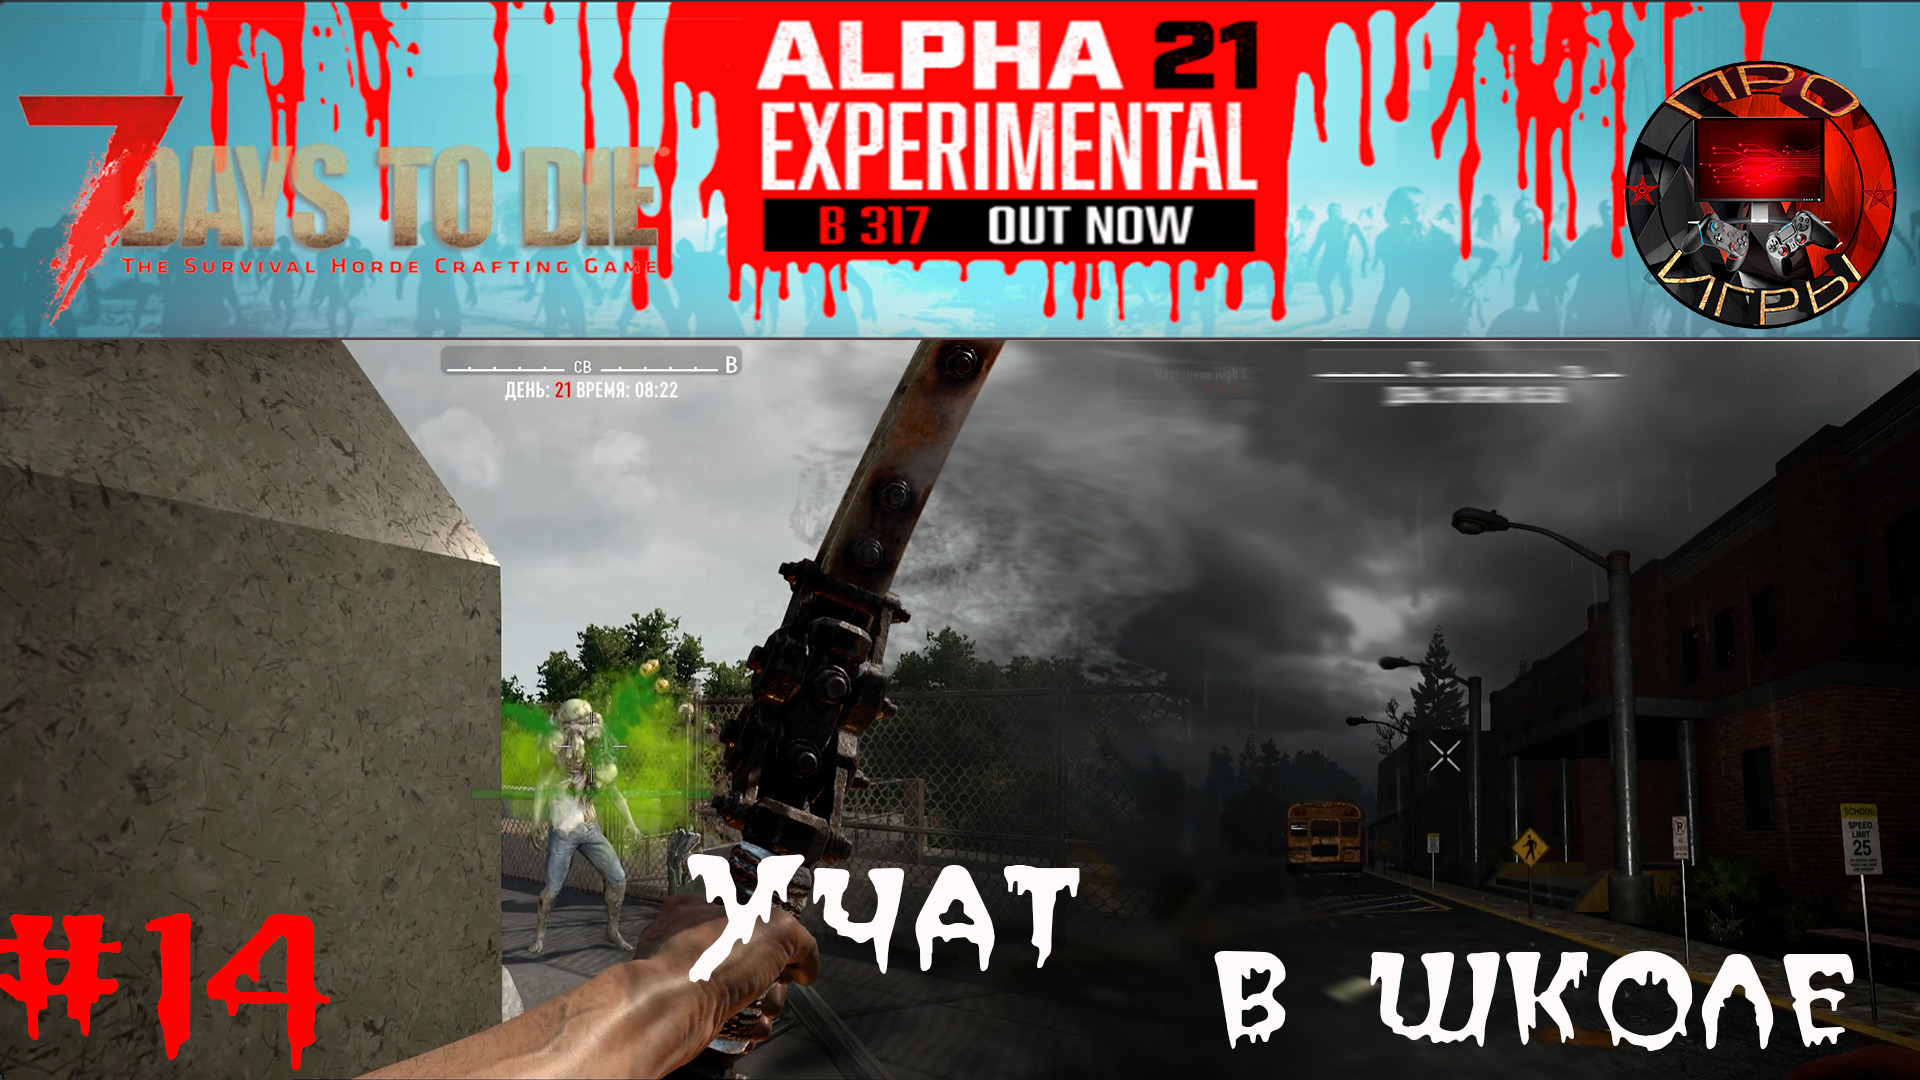 Could not fully initialize steam 7 days to die что делать фото 90